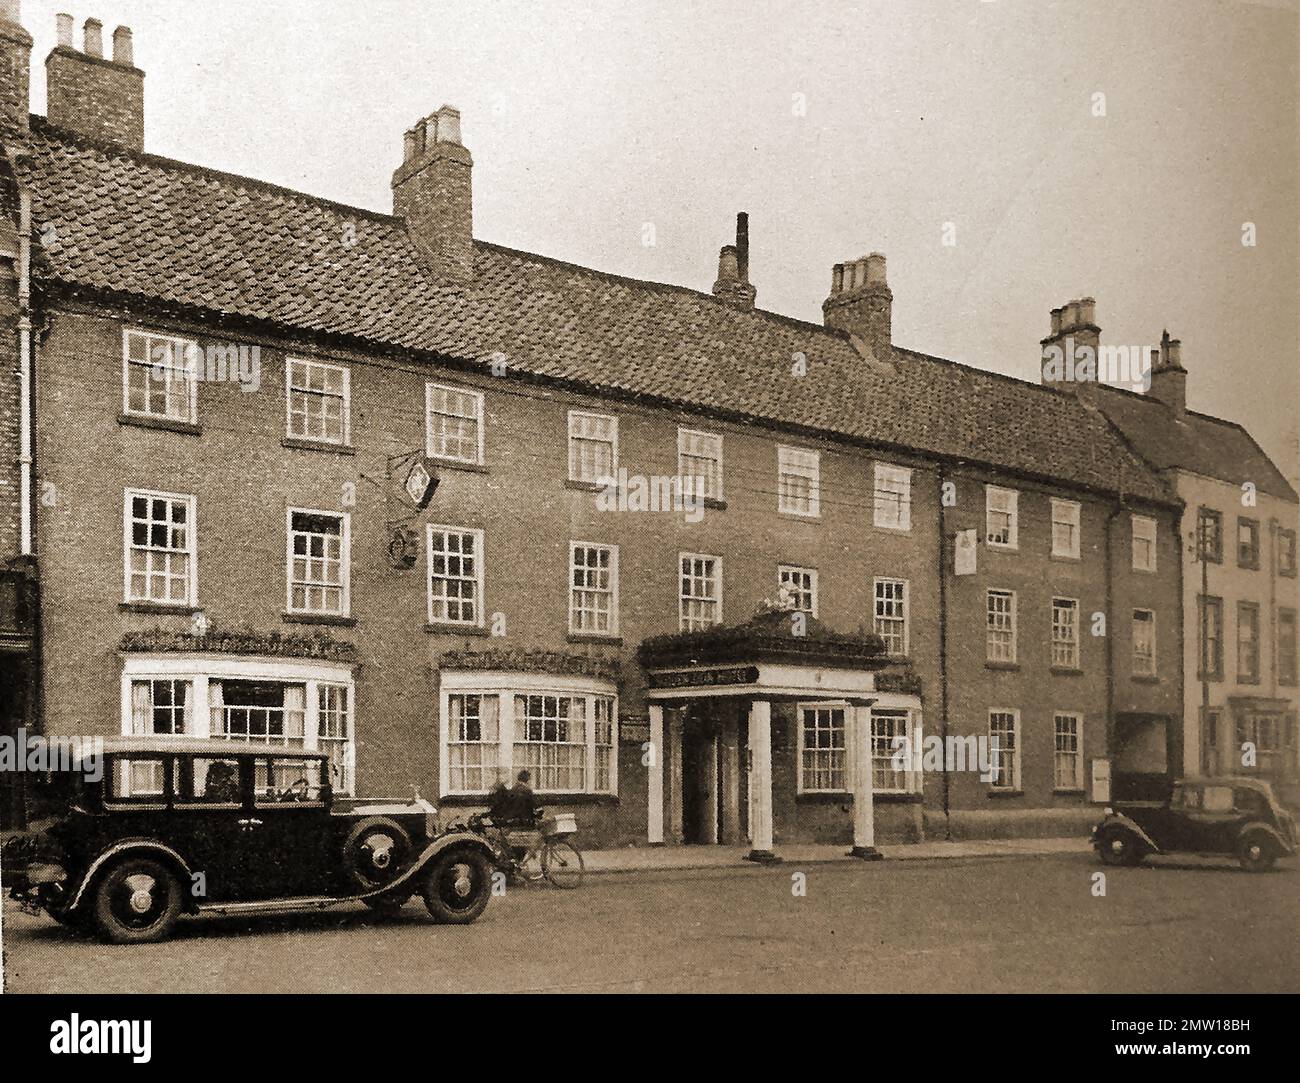 British pubs inns & taverns - A circa 1940 old photograph of the Golden Lion at Northallerton, Yorkshire with two  vintage motor cars of the time parked outsidde. Stock Photo